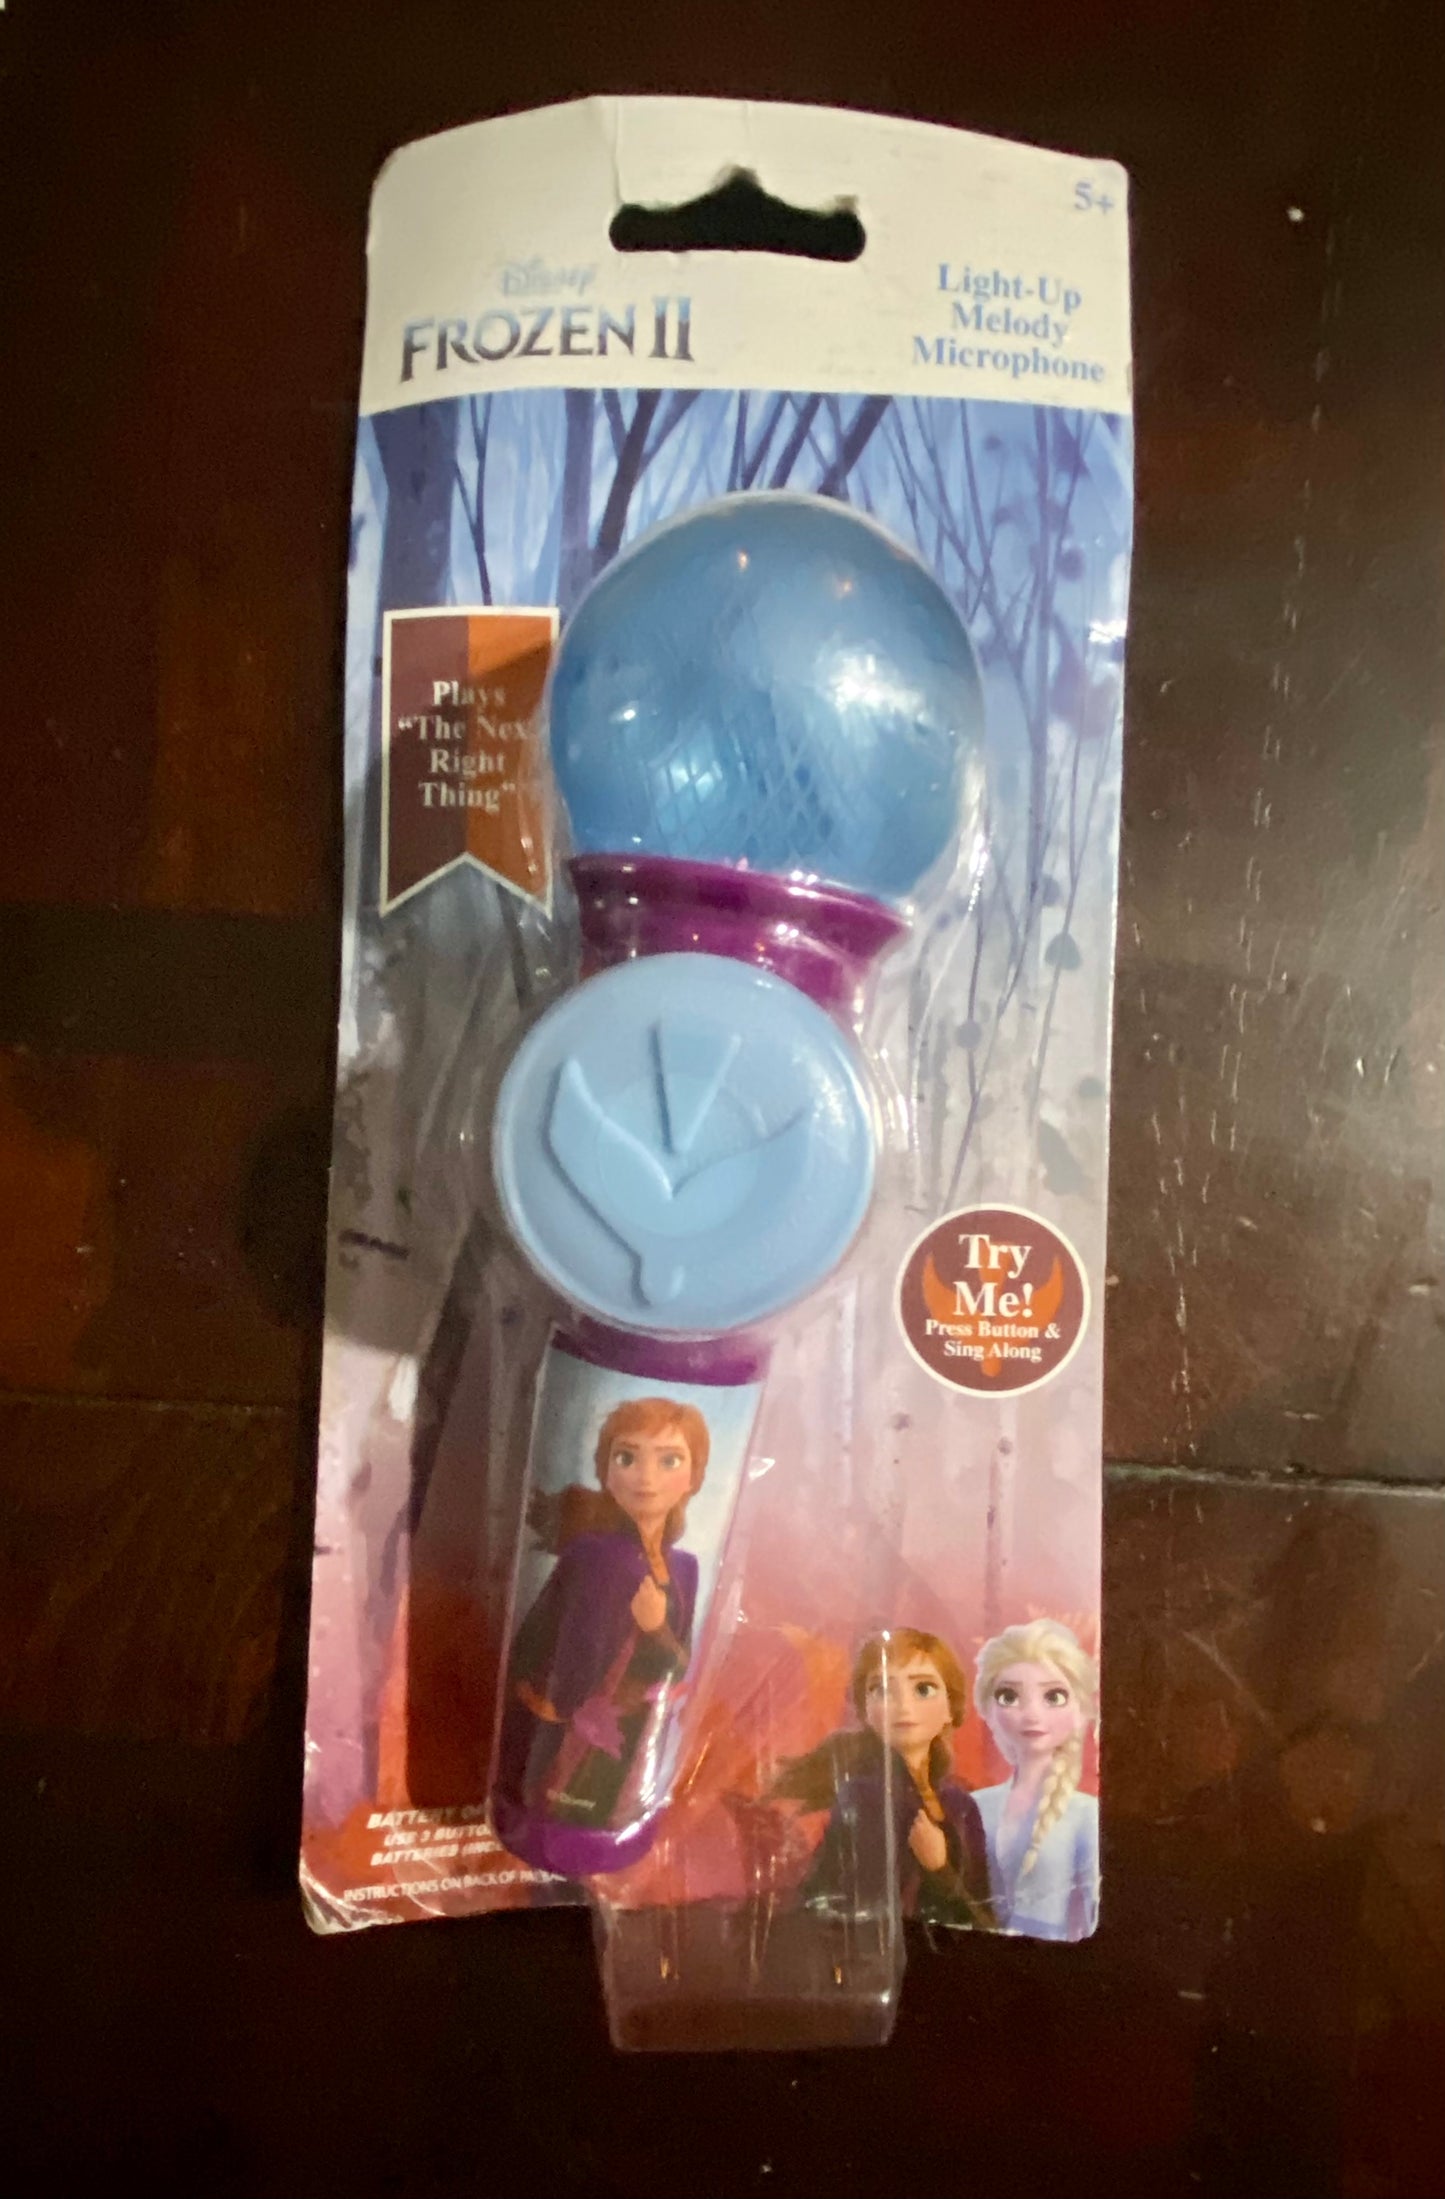 Disney Frozen 2 Light Up Melody Microphone Plays “The Next Right Thing” 26730